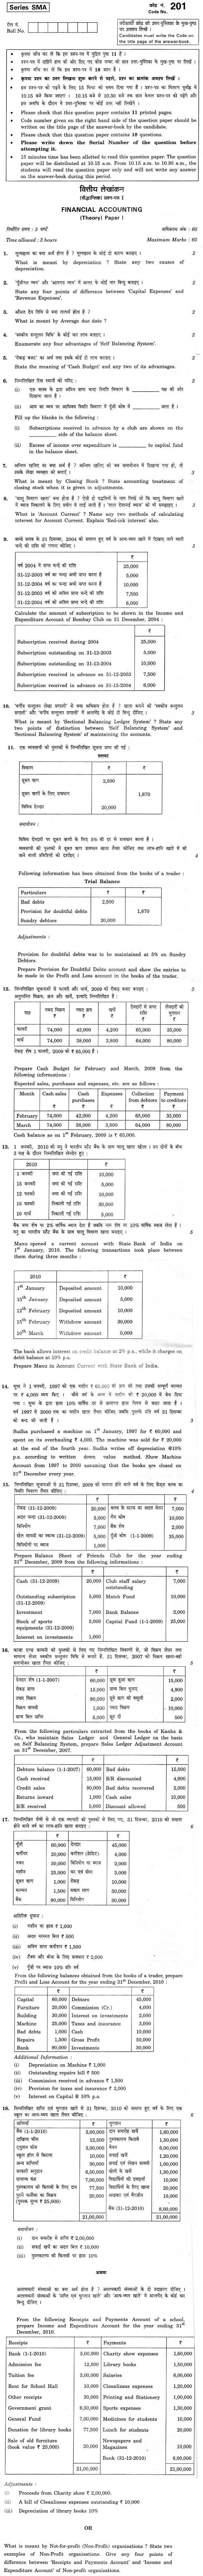 CBSE Class XII Previous Year Question Paper 2012 Financial Accounting Paper I